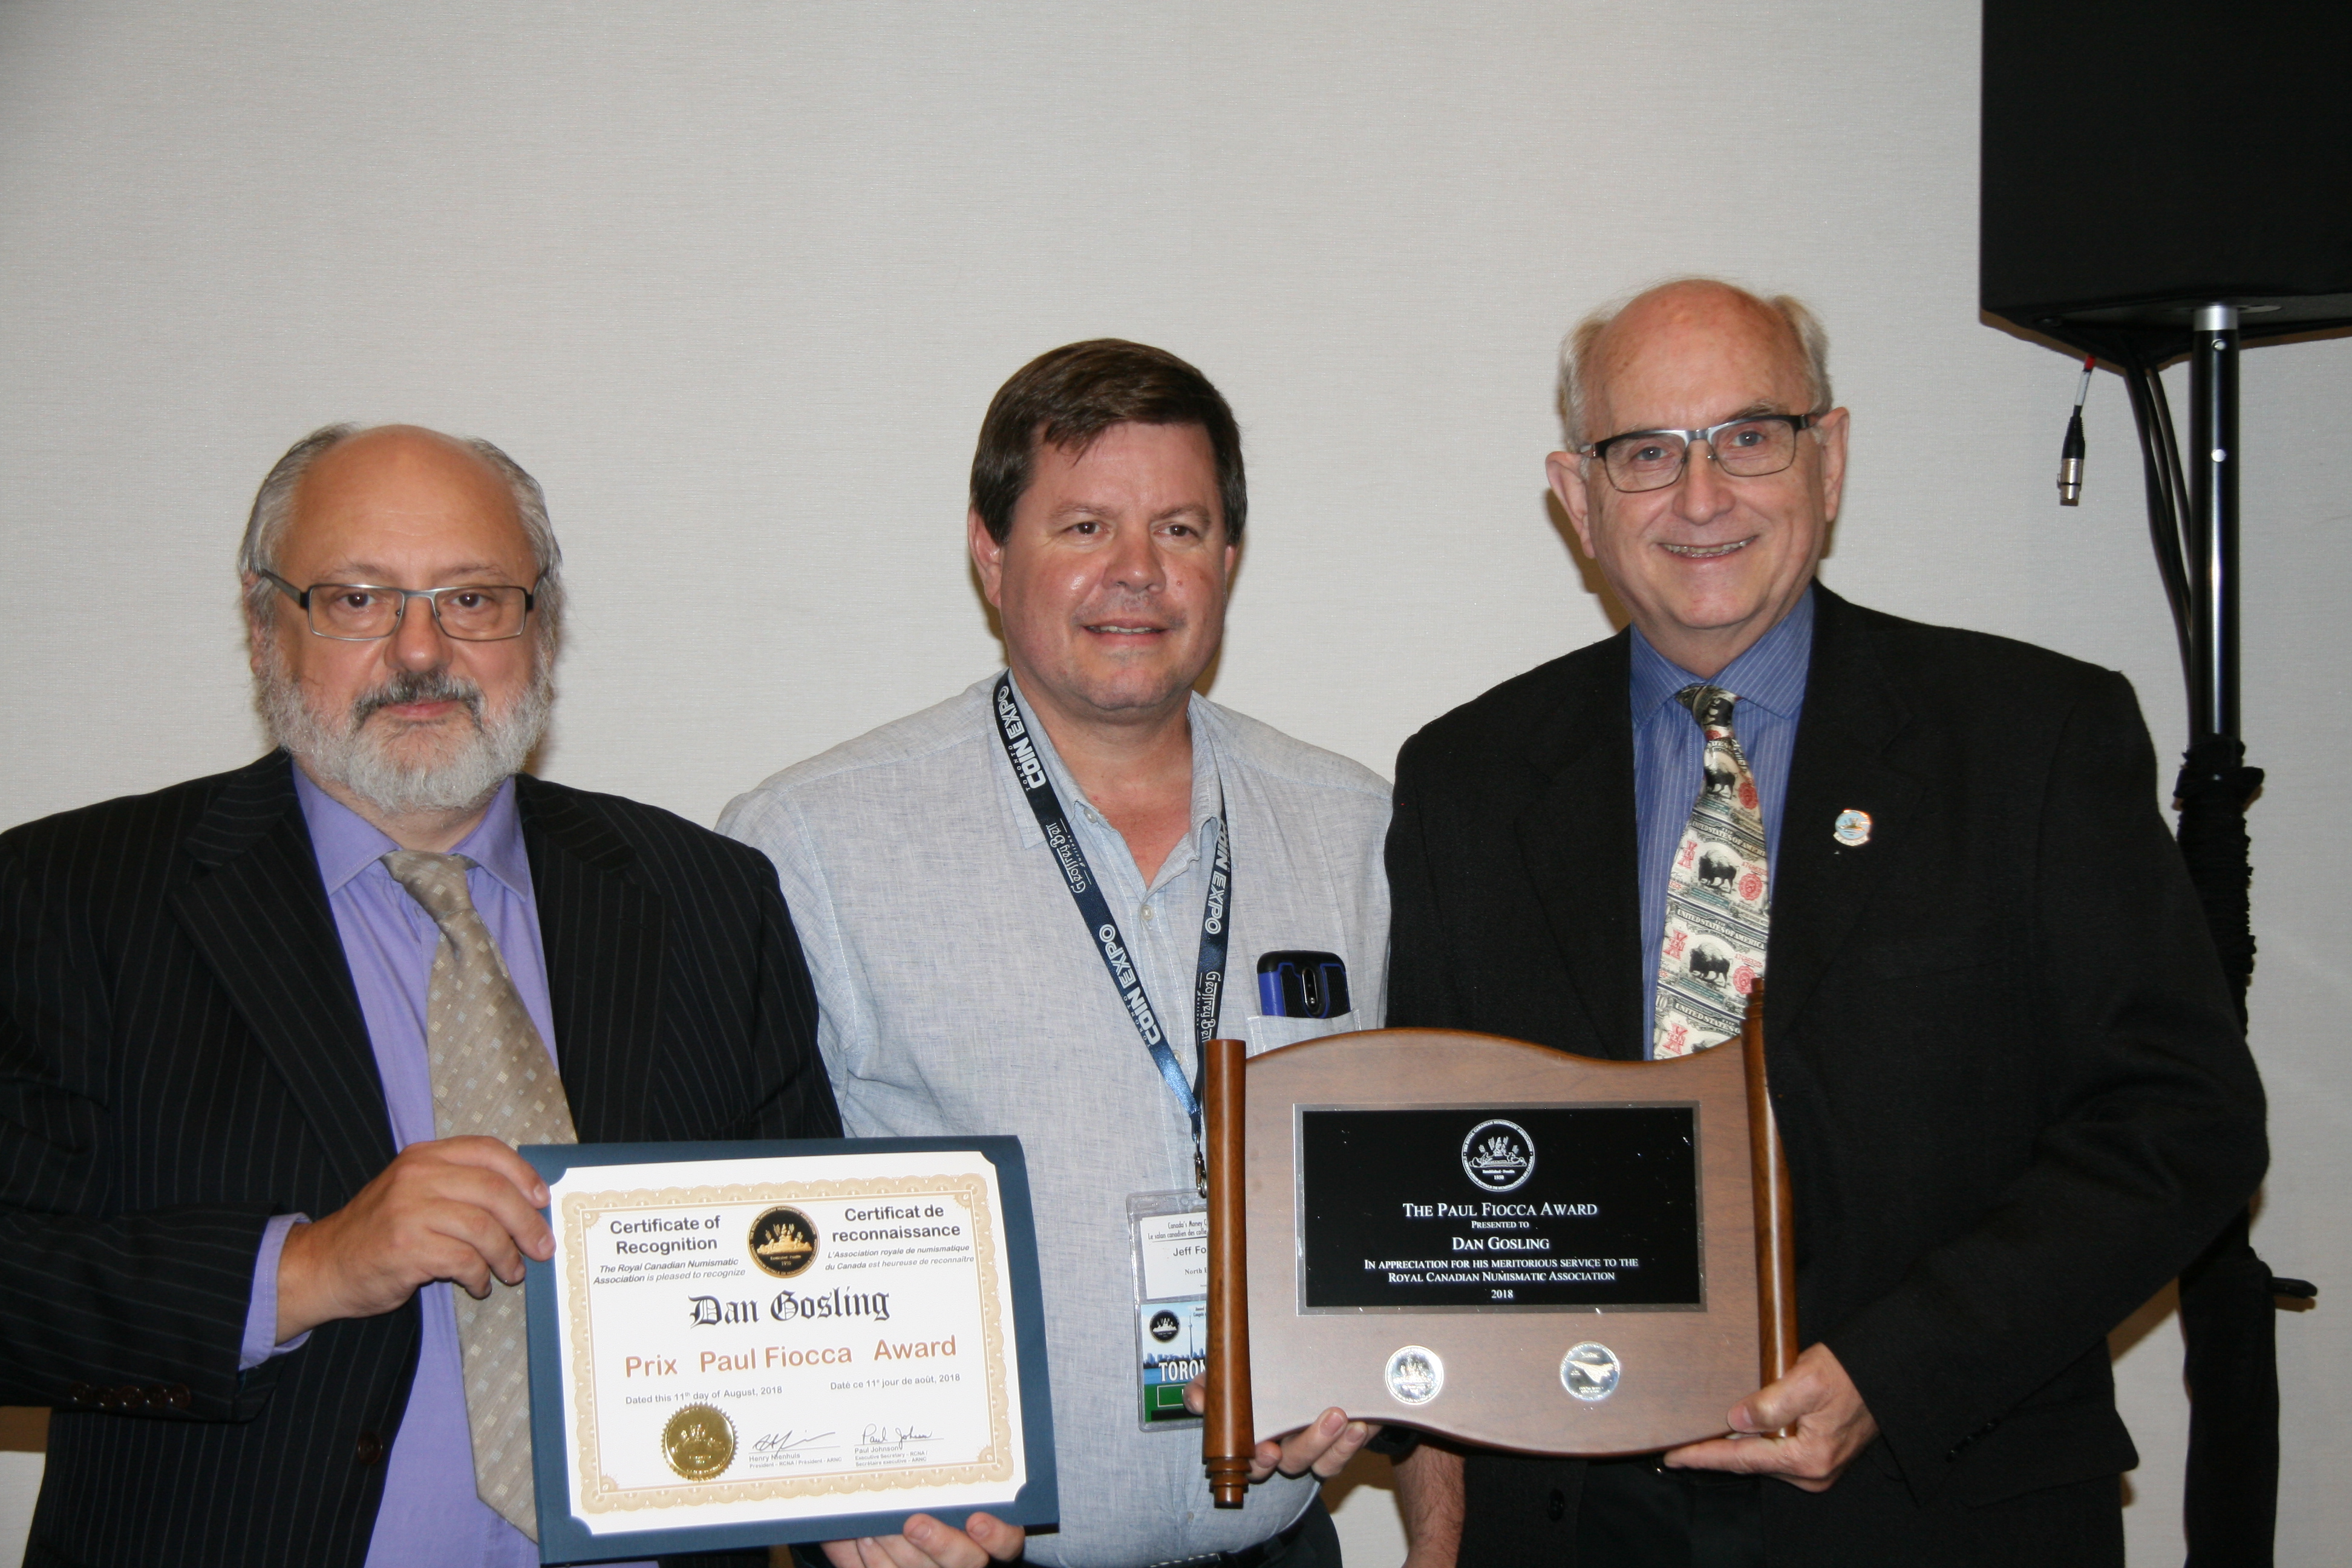 <p><strong>Dan Gosling</strong> (left) receiving the Paul Fiooca Award from <strong>Henry Nienhuis</strong> (left) and Trajan Publications, represented by <strong>Jeff Fournier</strong> (center).<br /> <small>J. Scott photo</small></p>